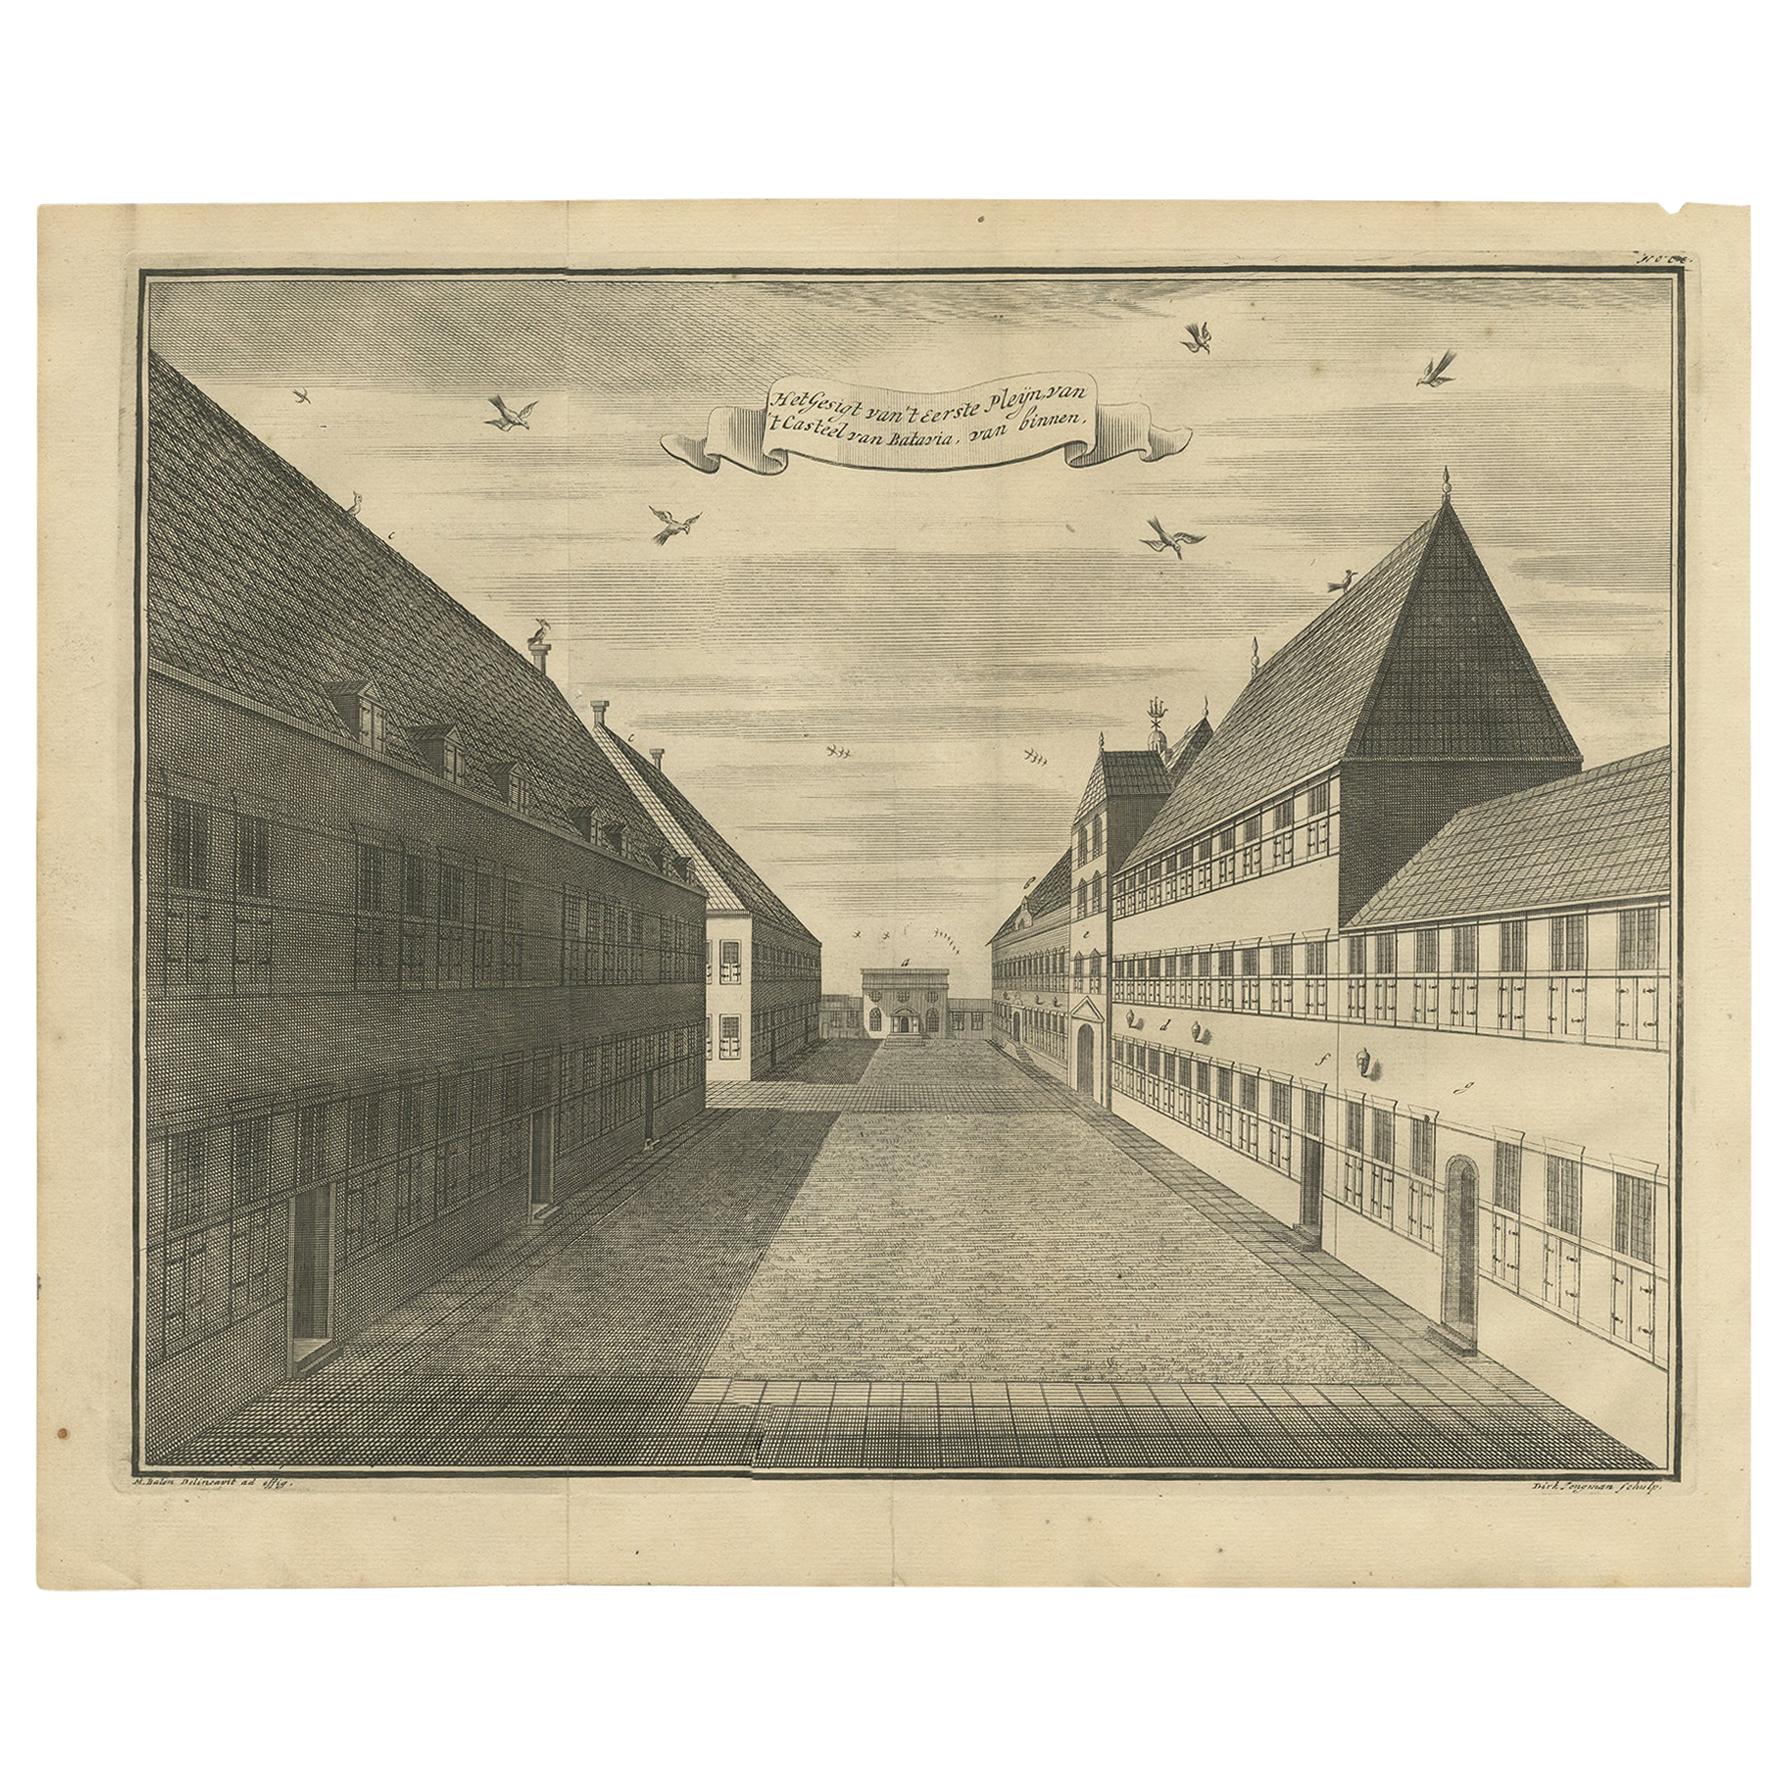 Antique Print of the First Square of the Castle of Batavia by Valentijn, '1726'